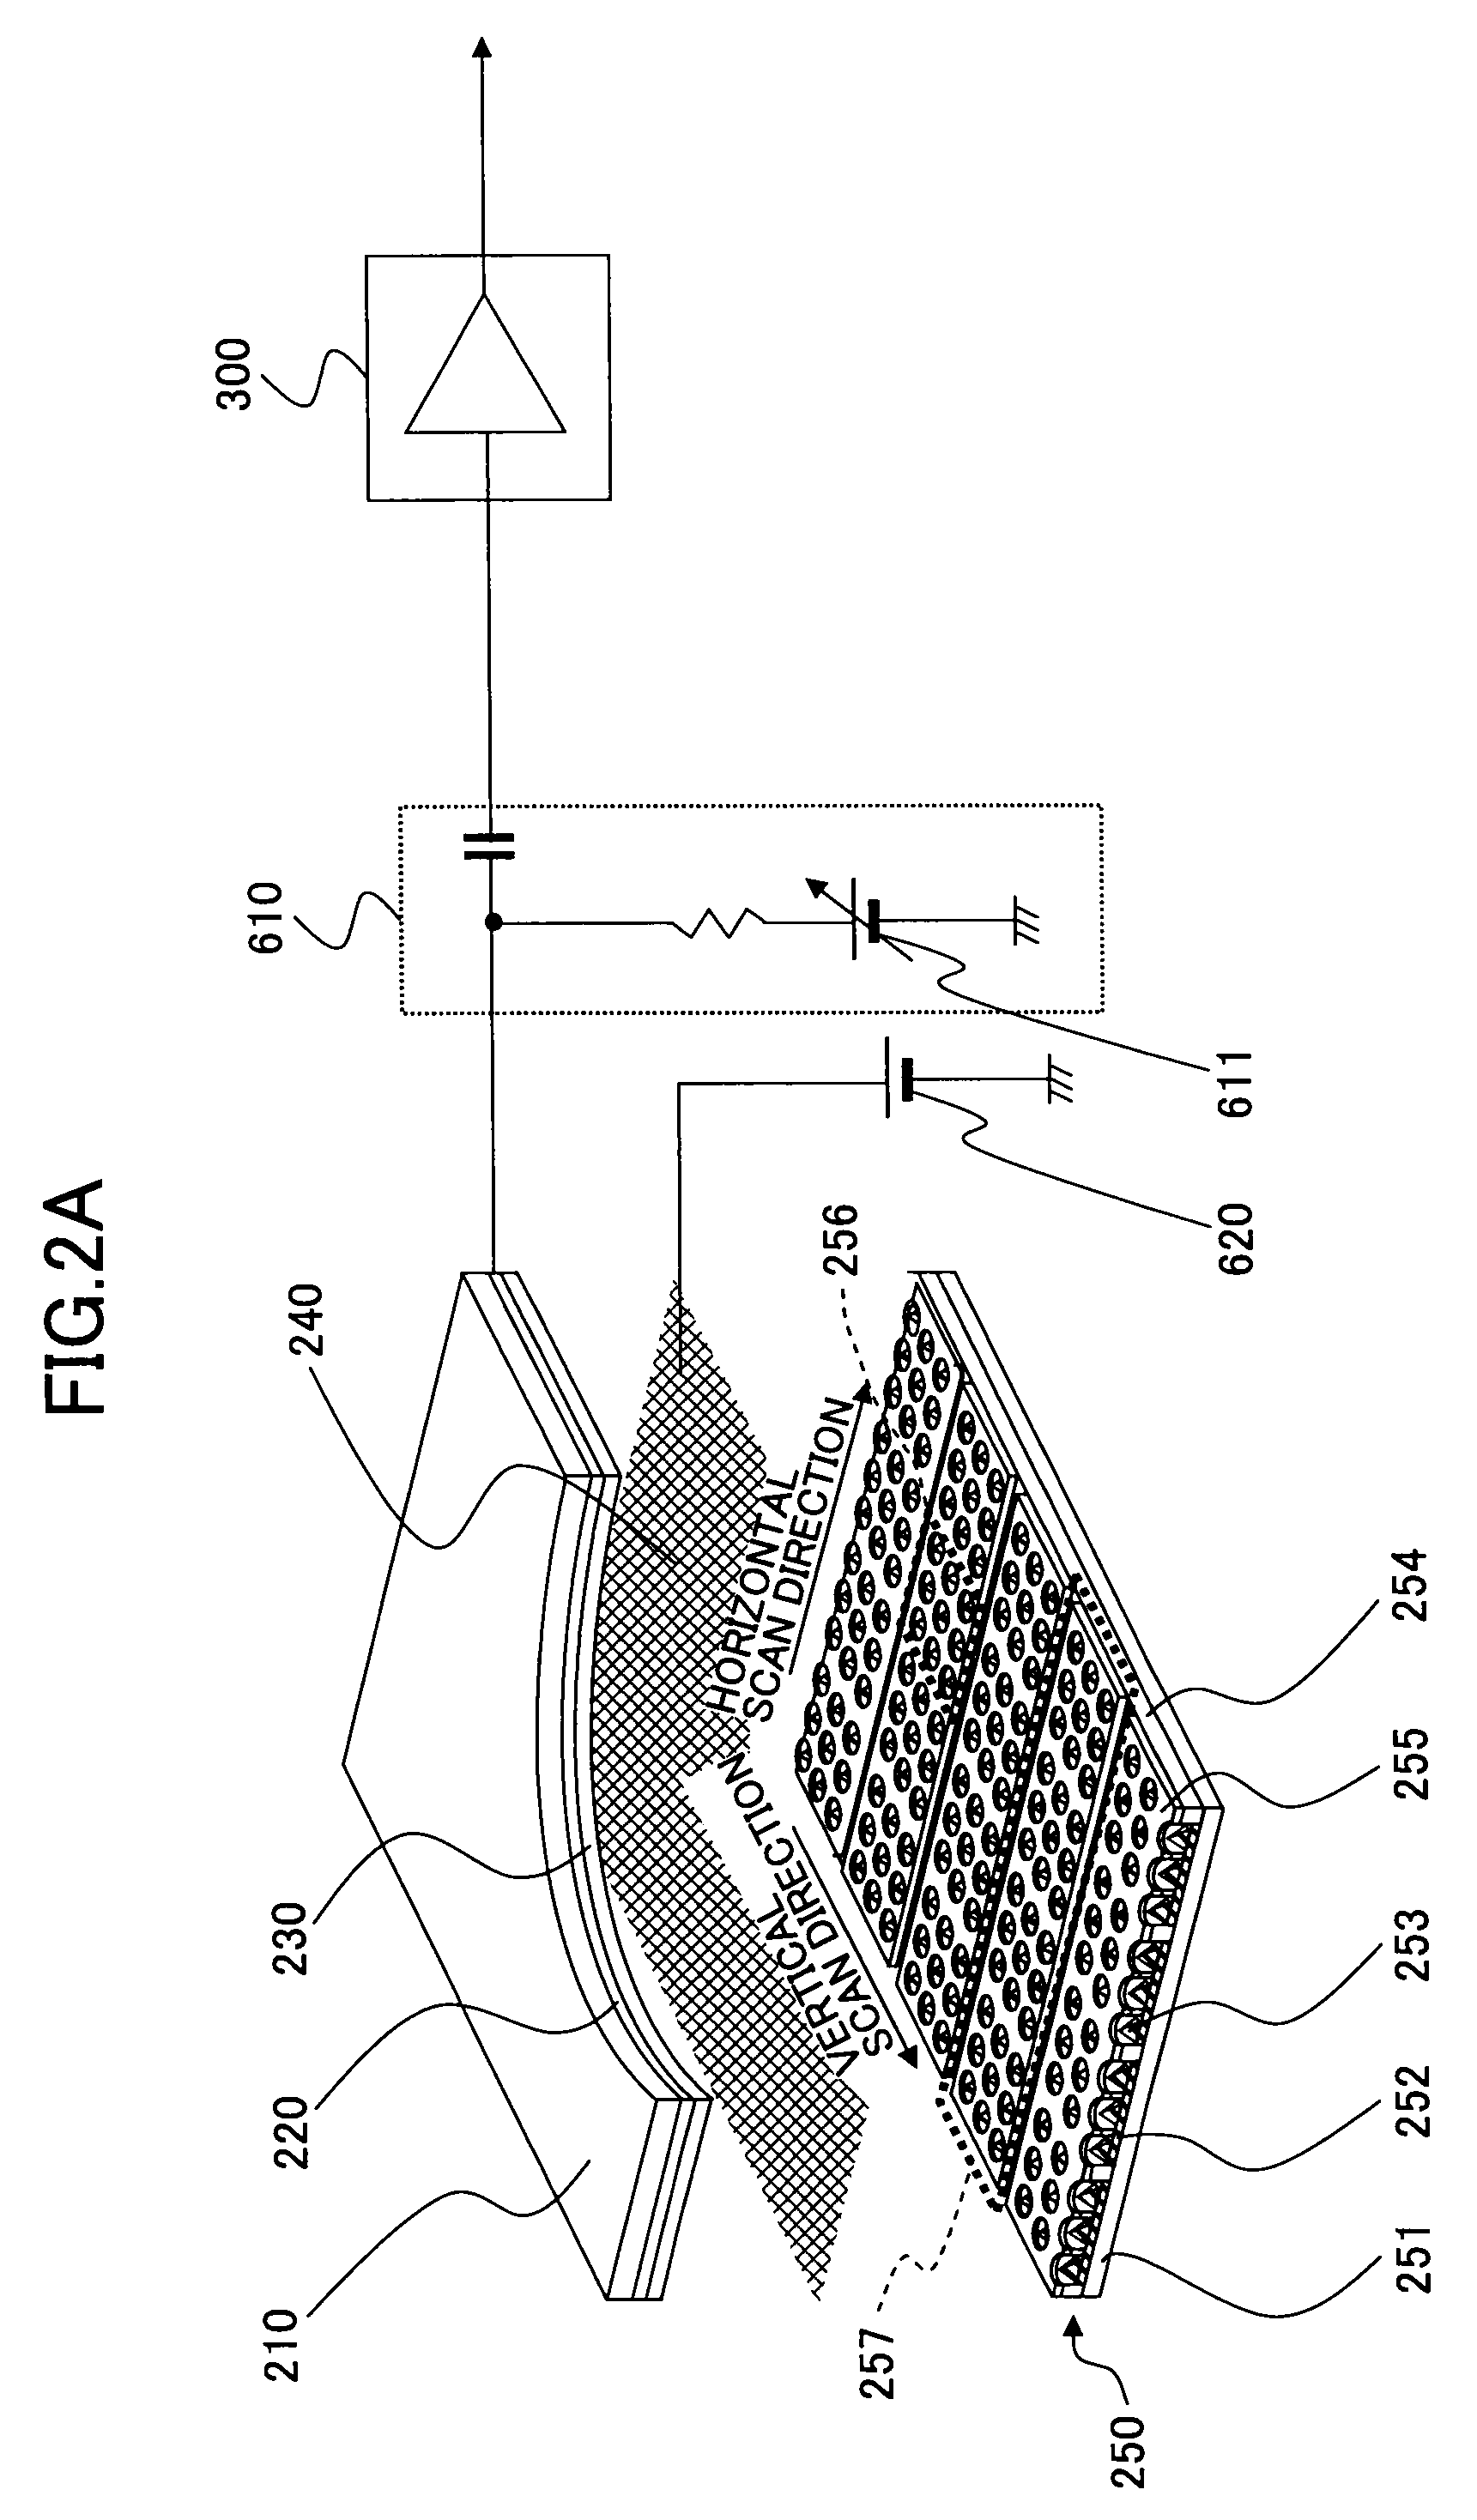 Imaging apparatus having electron source array that emits electrons during a blanking period